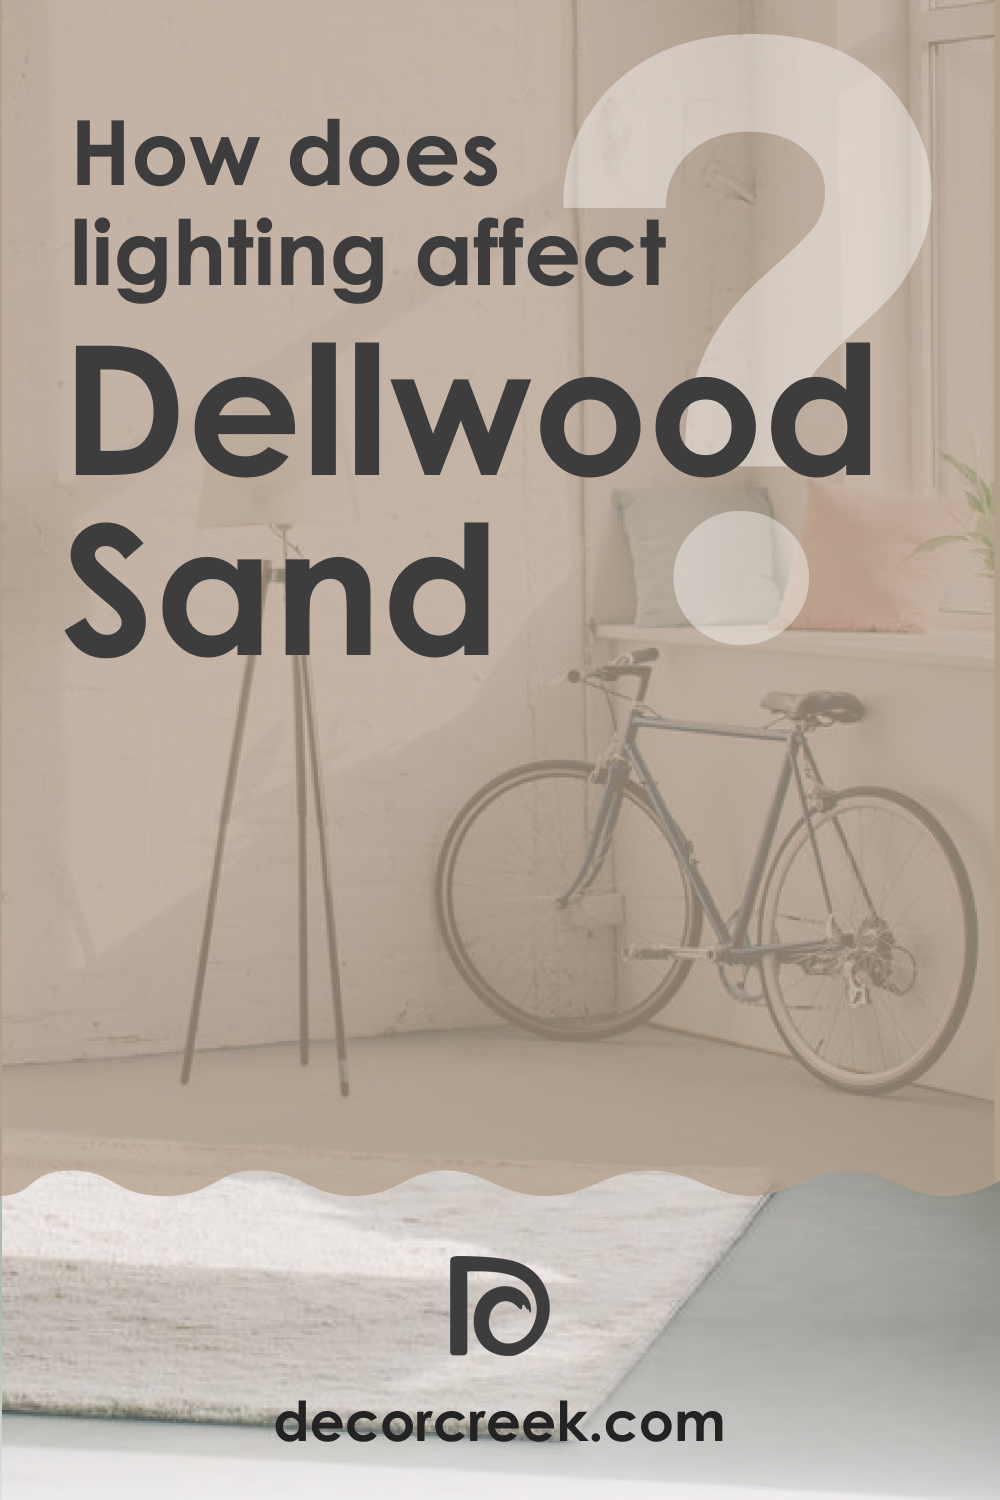 How Does Lighting Affect Dellwood Sand 1019?